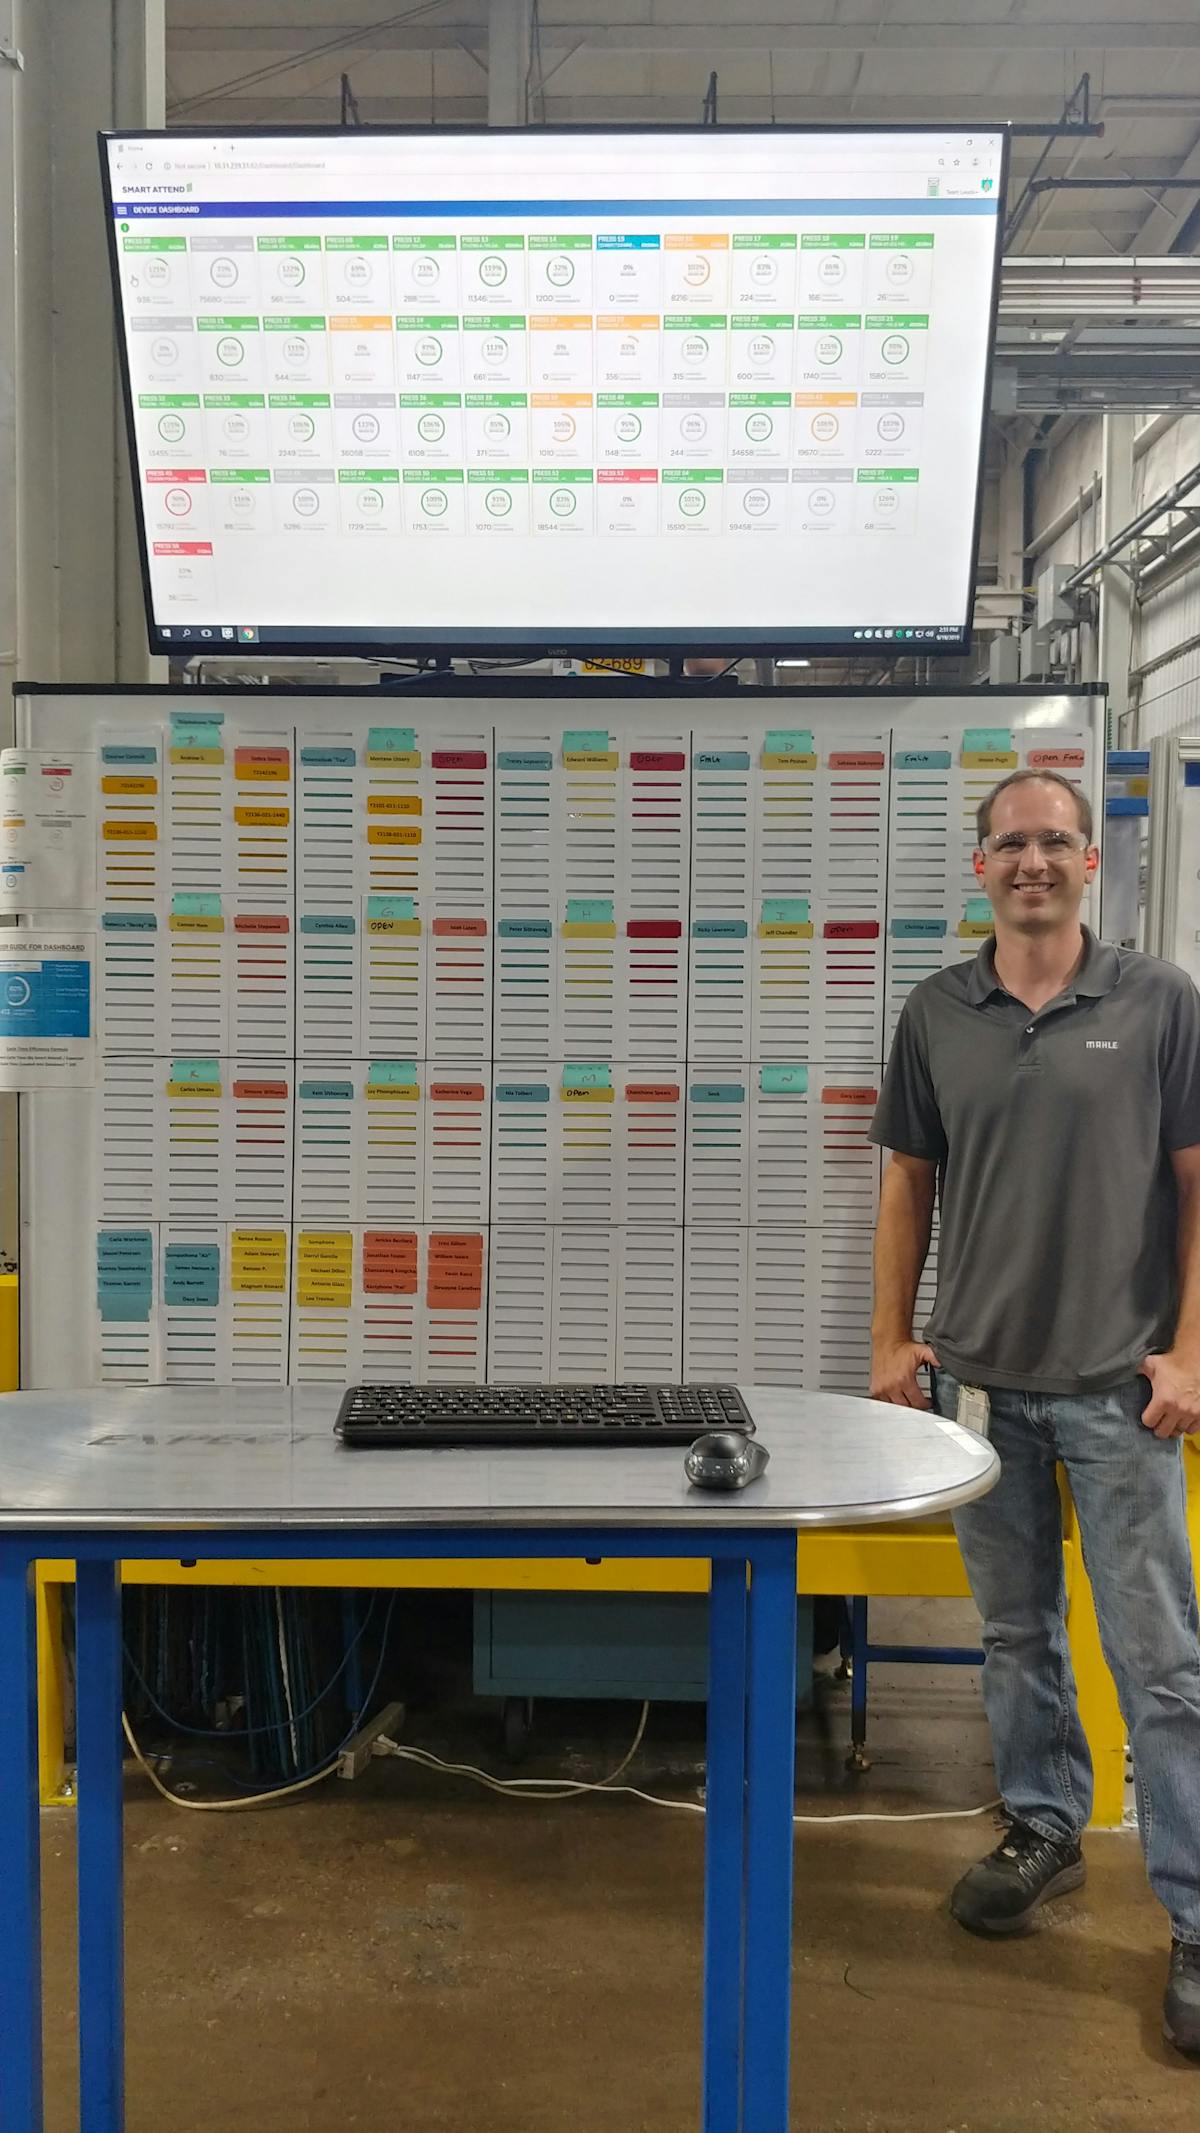 Matt Eargle, an industrial engineer with Mahle NA, helped his company install a data-monitoring system from Smart Attend.